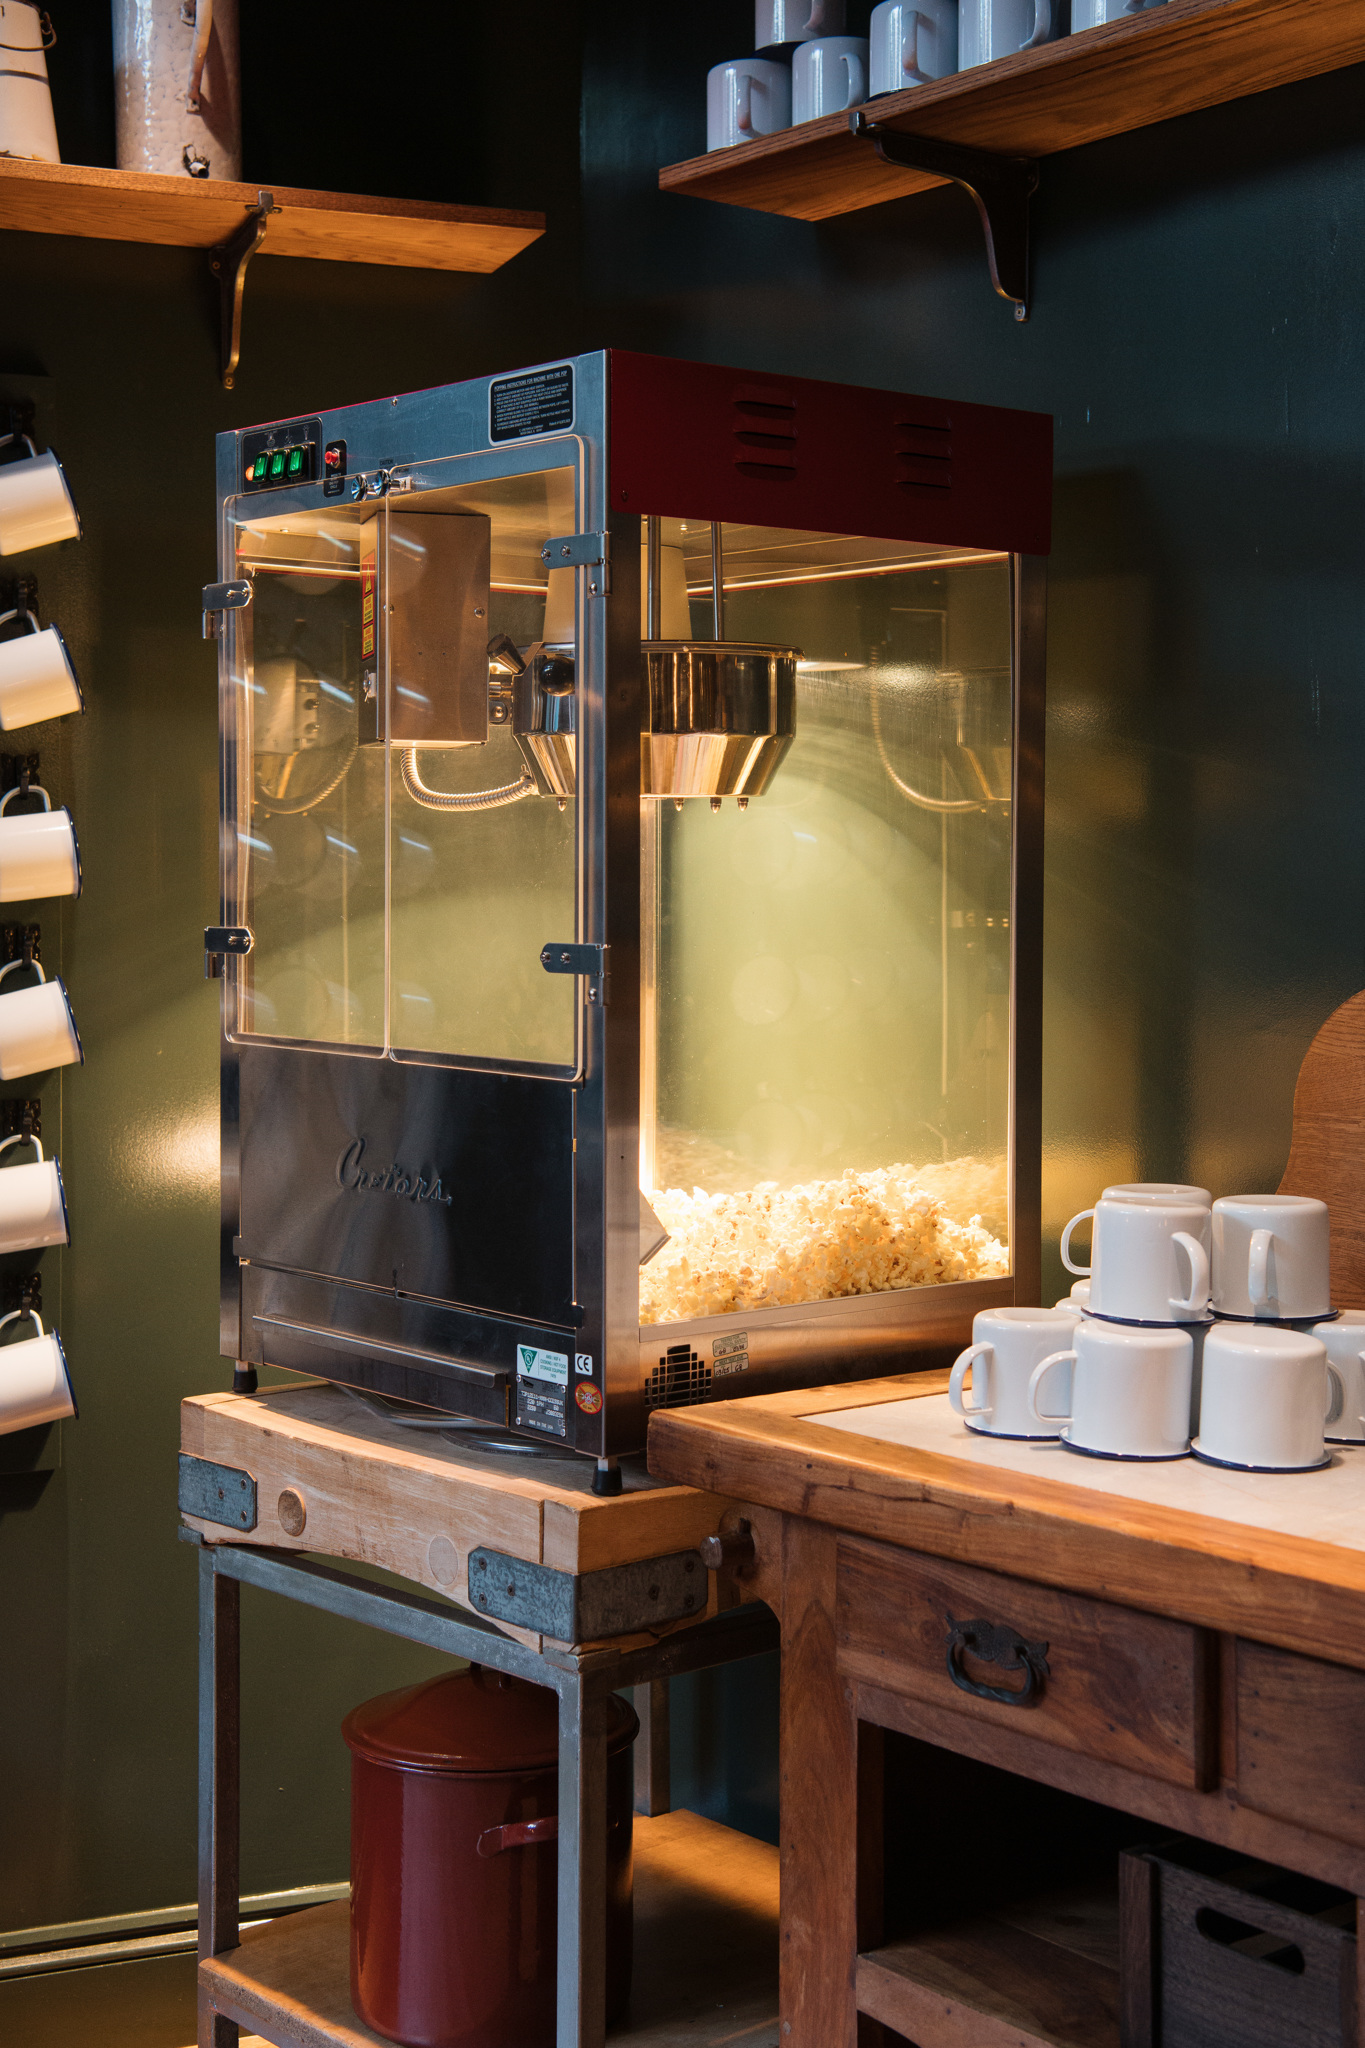 free popcorn machine against a green wall with warm lighting